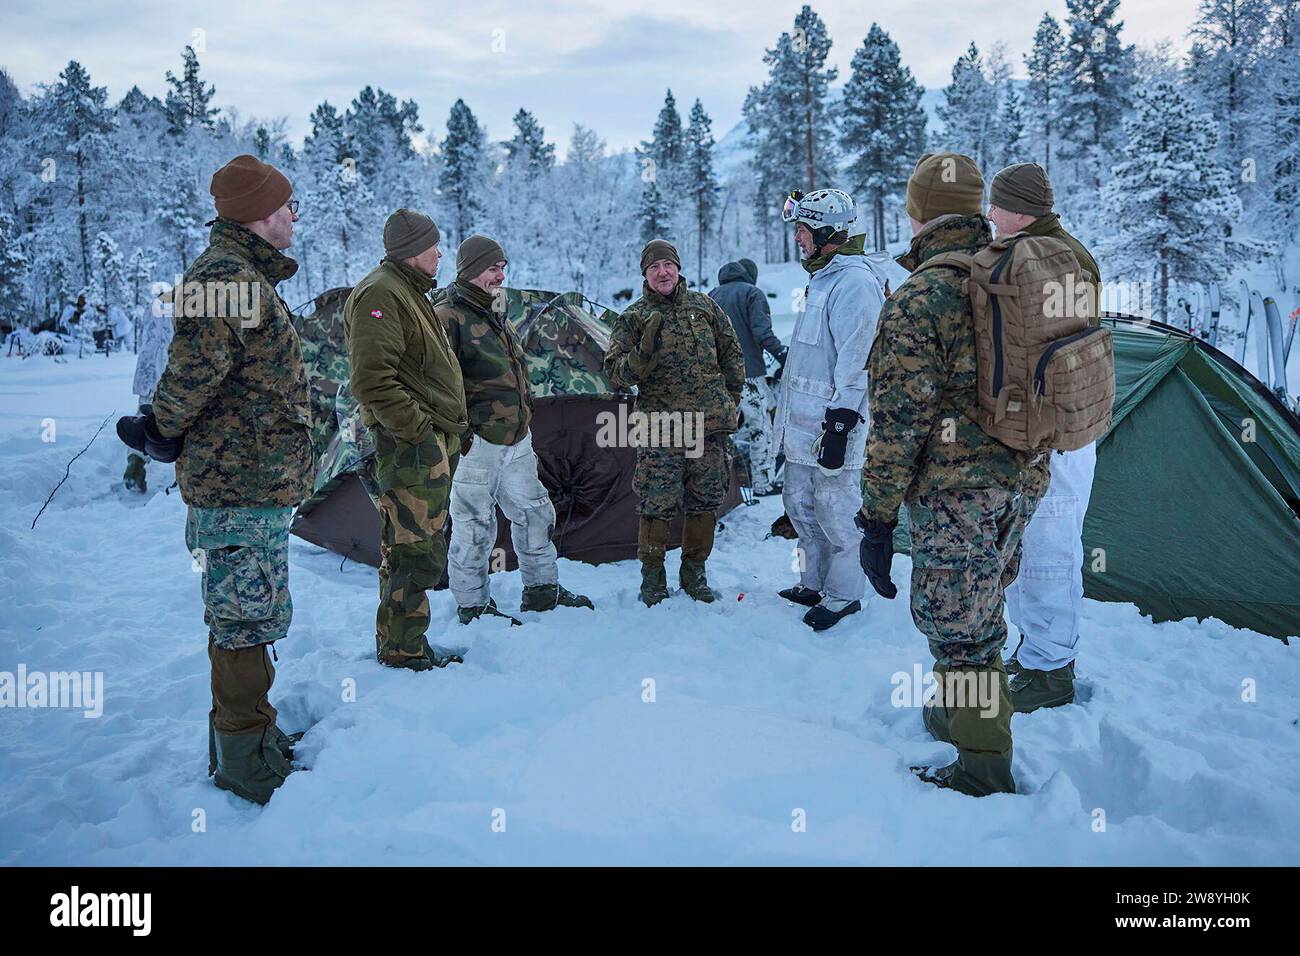 Setermoen, Norway. 8th Dec, 2023. December 8, 2023 - Setermoen, Norway - U.S. Marine Corps Maj. Gen. Robert B. Sofge Jr., commander of U.S. Marine Corps Forces Europe and Africa, speaks with Norwegian Soldiers and U.S. Marines, in Setermoen, Norway on December. 8, 2023. Sofge visited the Marines participating in the NATO Winter Instructor Course. The NWIC trains Marines and other service members as instructors for cold weather survival in preparation for upcoming deployments. This strategic engagement not only amplifies the significance of Sofge's direct involvement with the Marines but f Stock Photo